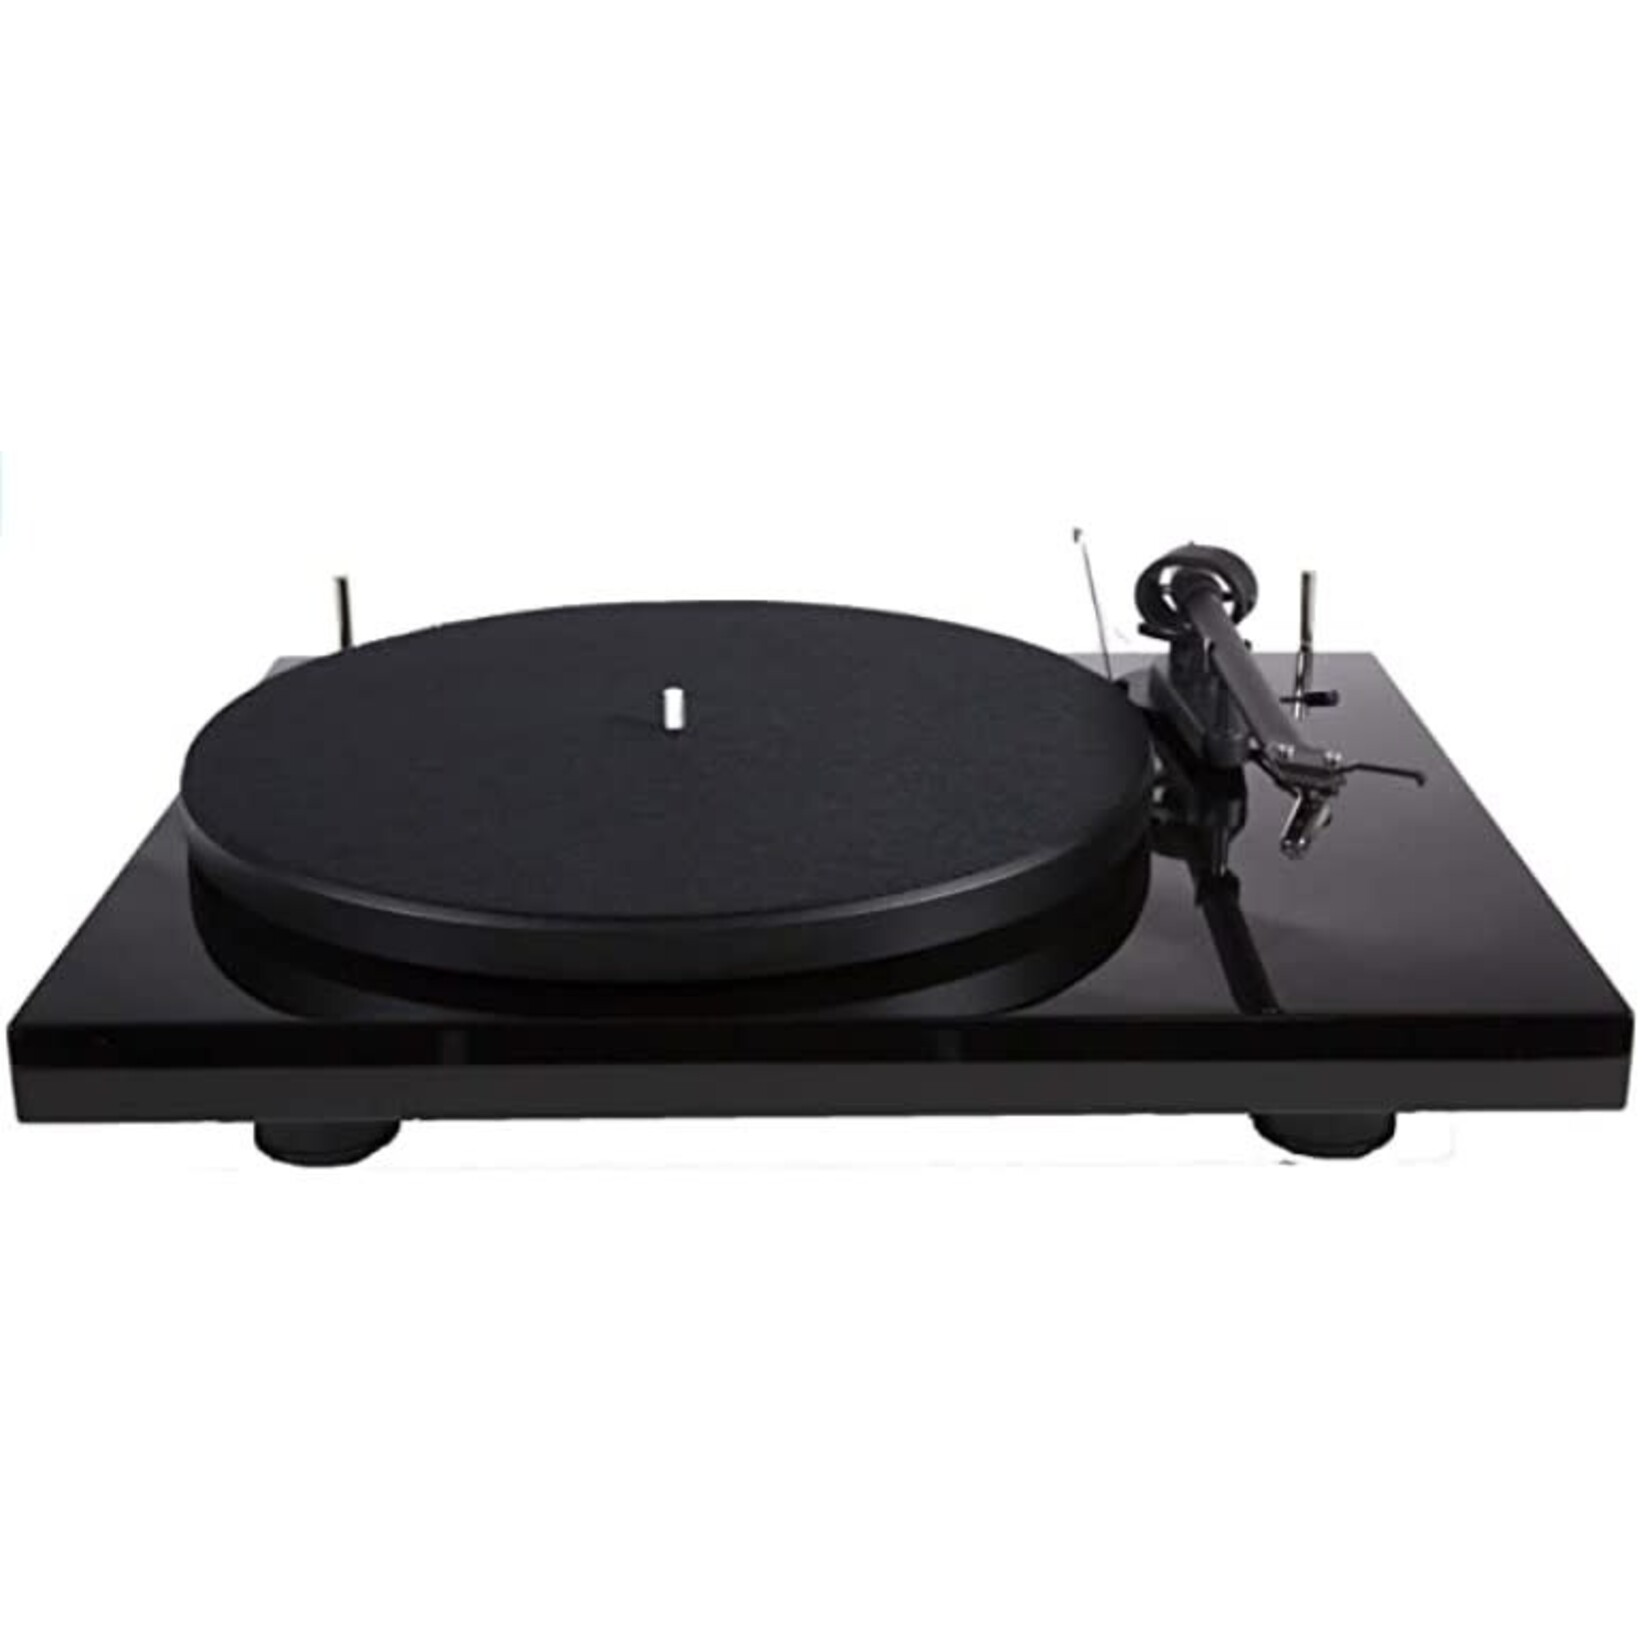 Pro-Ject Pro-Ject Debut III Phono BT SB Turntable (high gloss black)